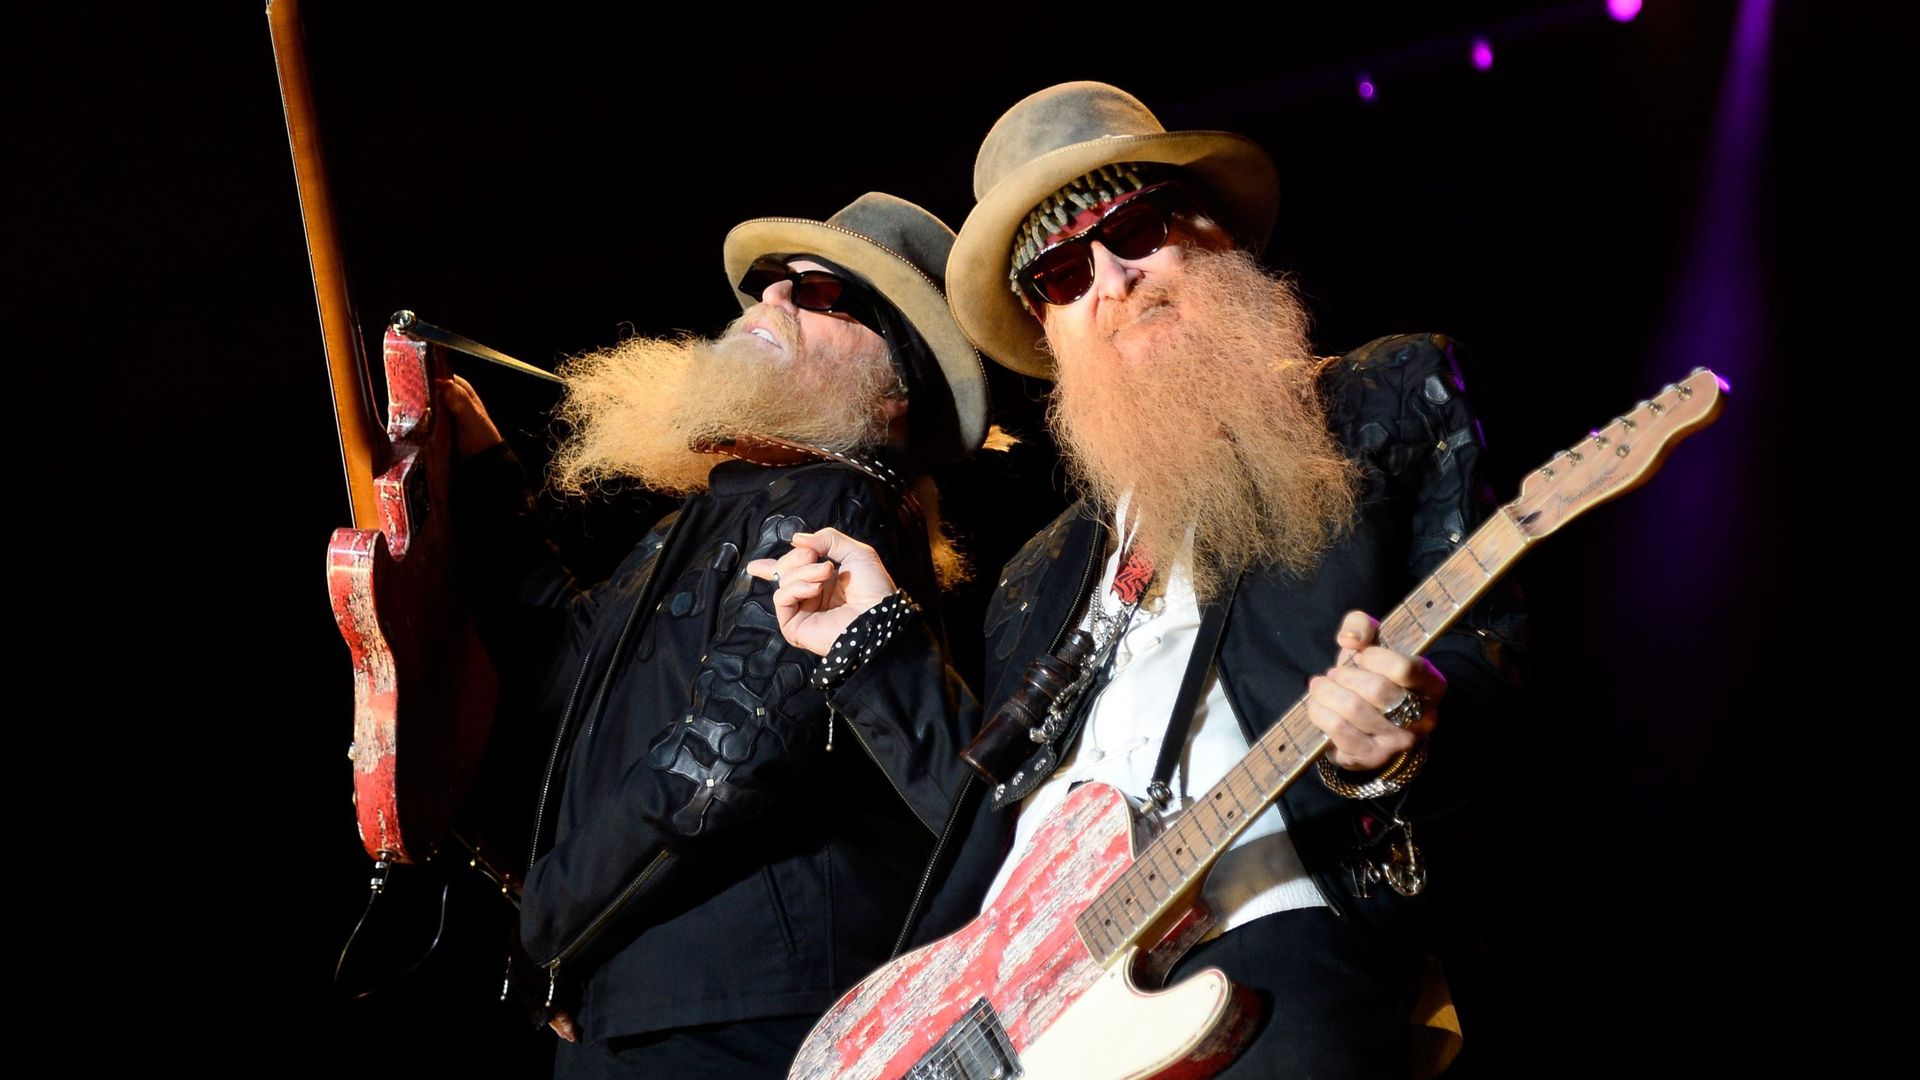 Tempo : ZZ Top, that little ol' band from Texas